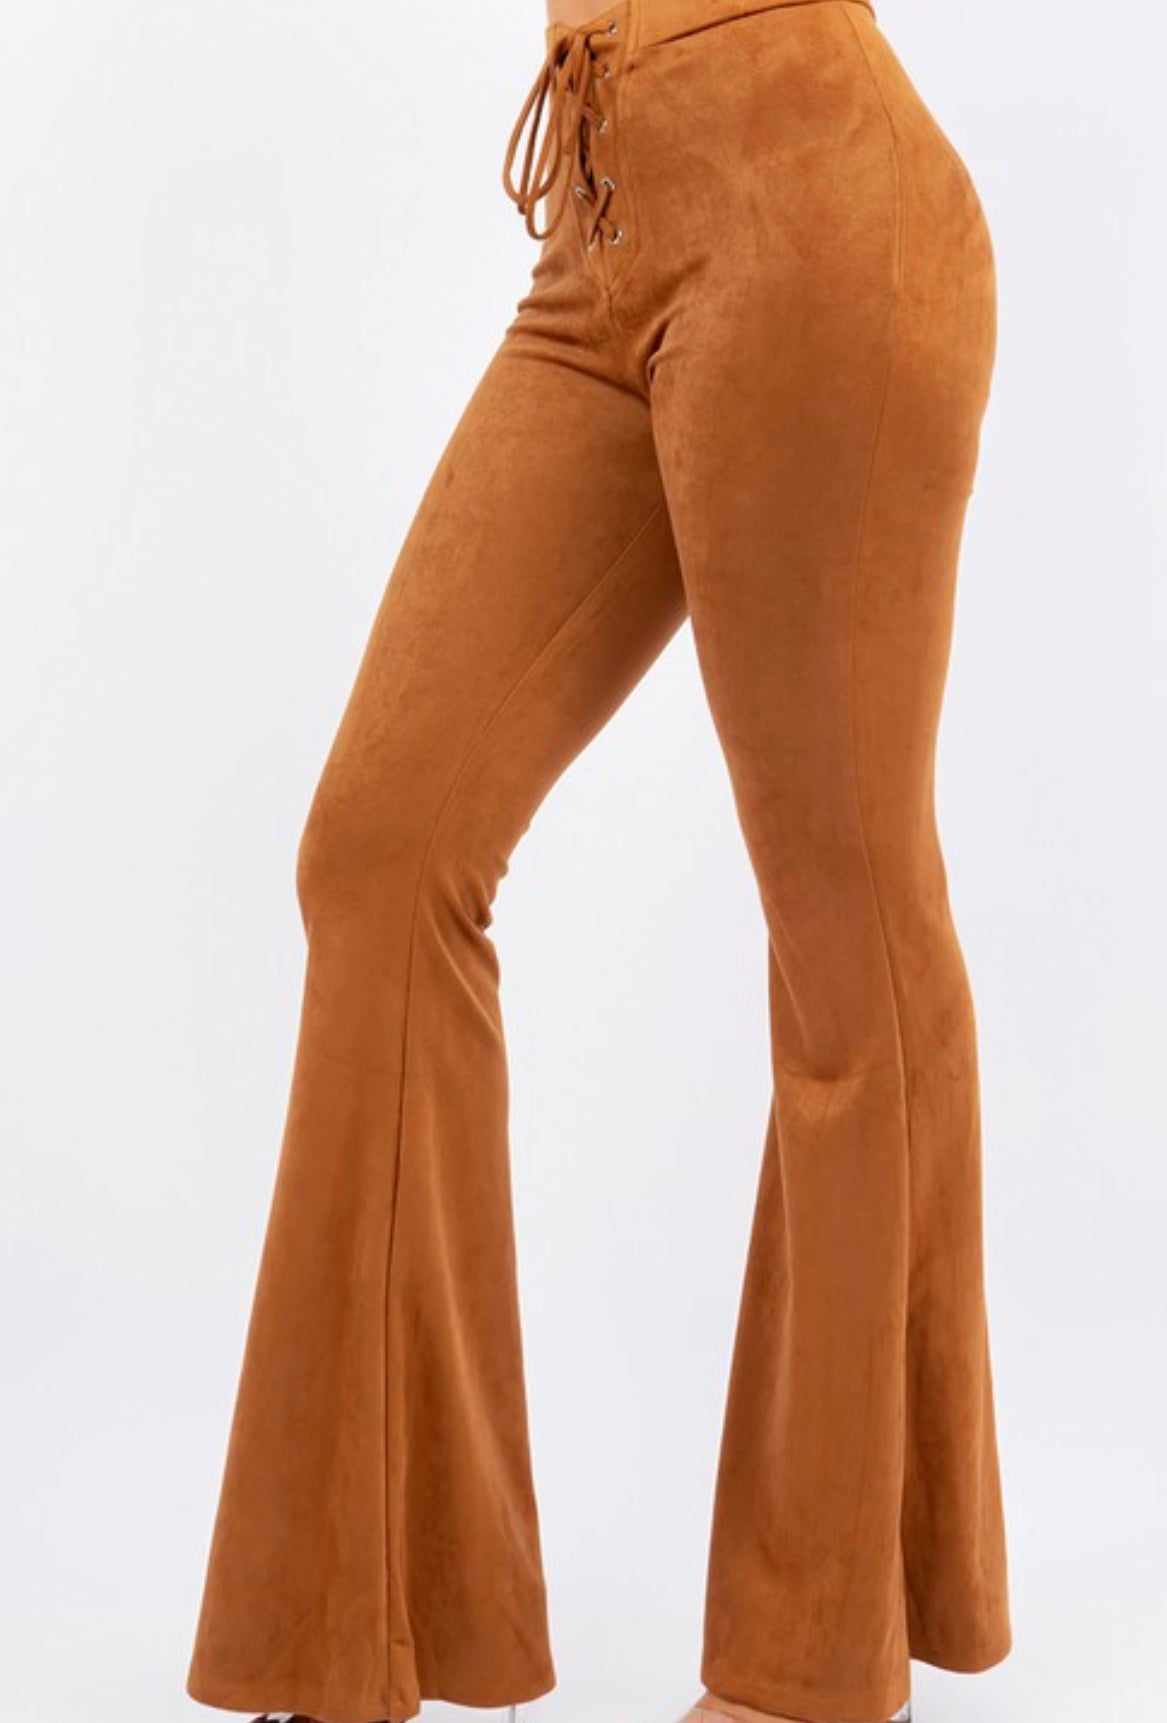 Lace Up Seude Camel Flare Pants